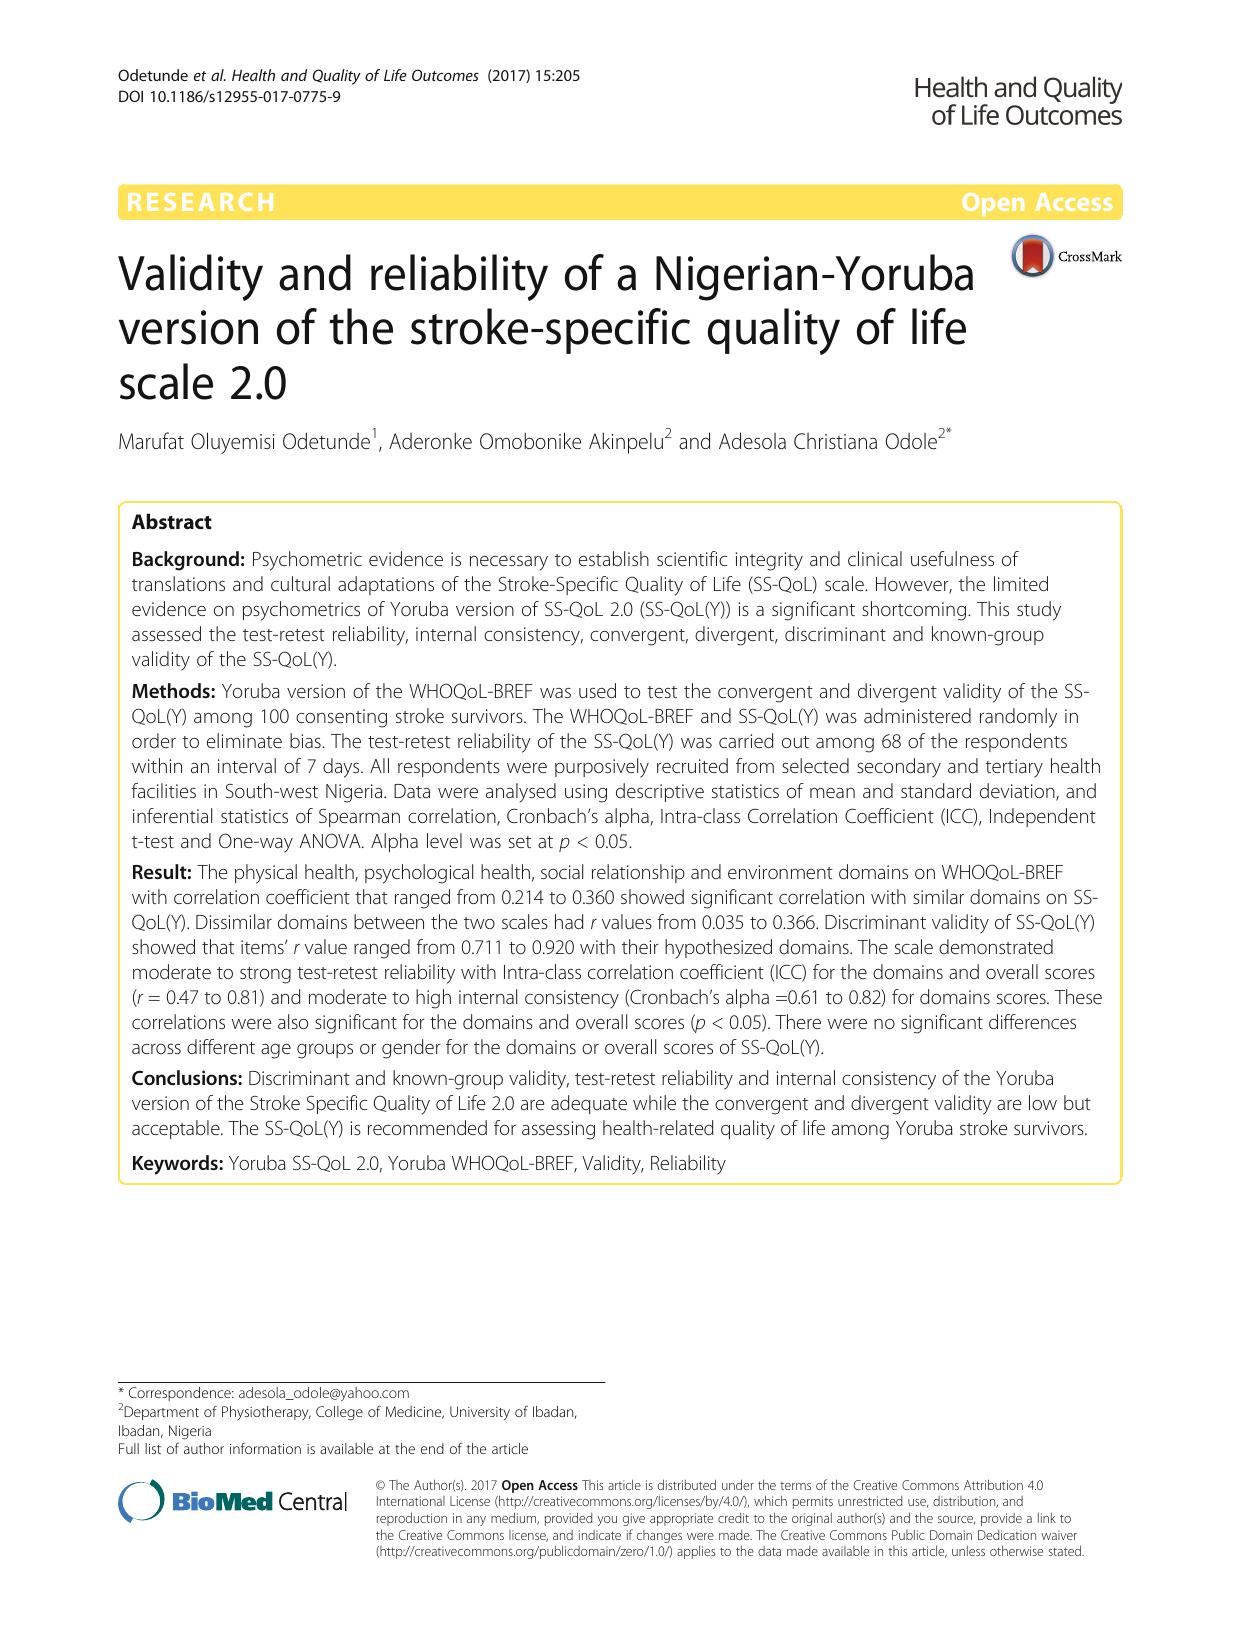 Validity and reliability of a Nigerian-Yoruba version of the stroke-specific quality of life scale 2.0